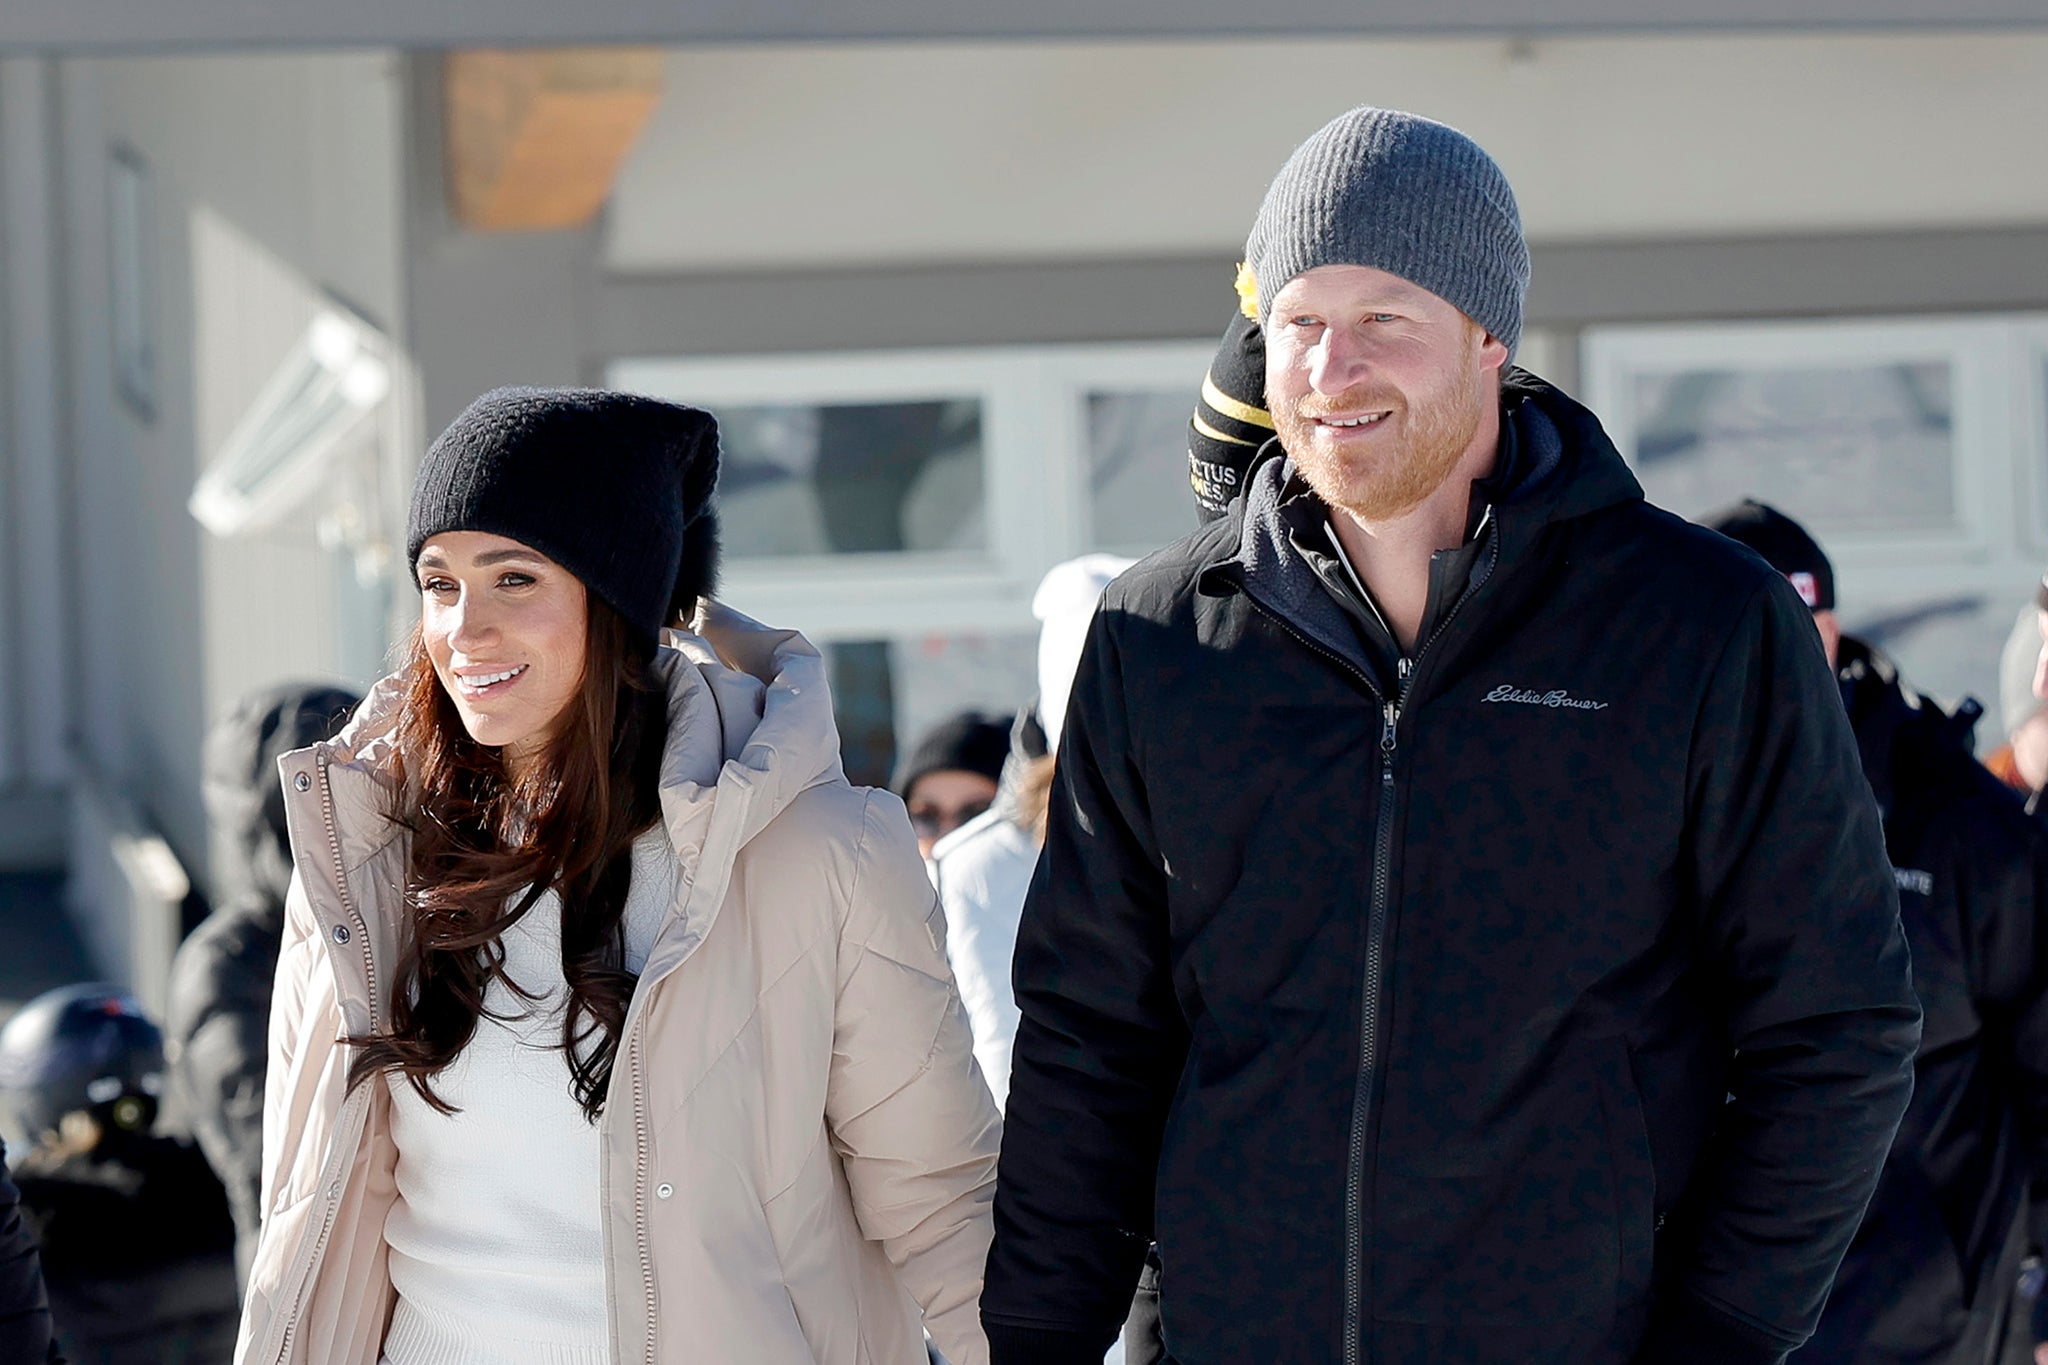 Meghan and Harry attend an event for the Invictus Games in Vancouver